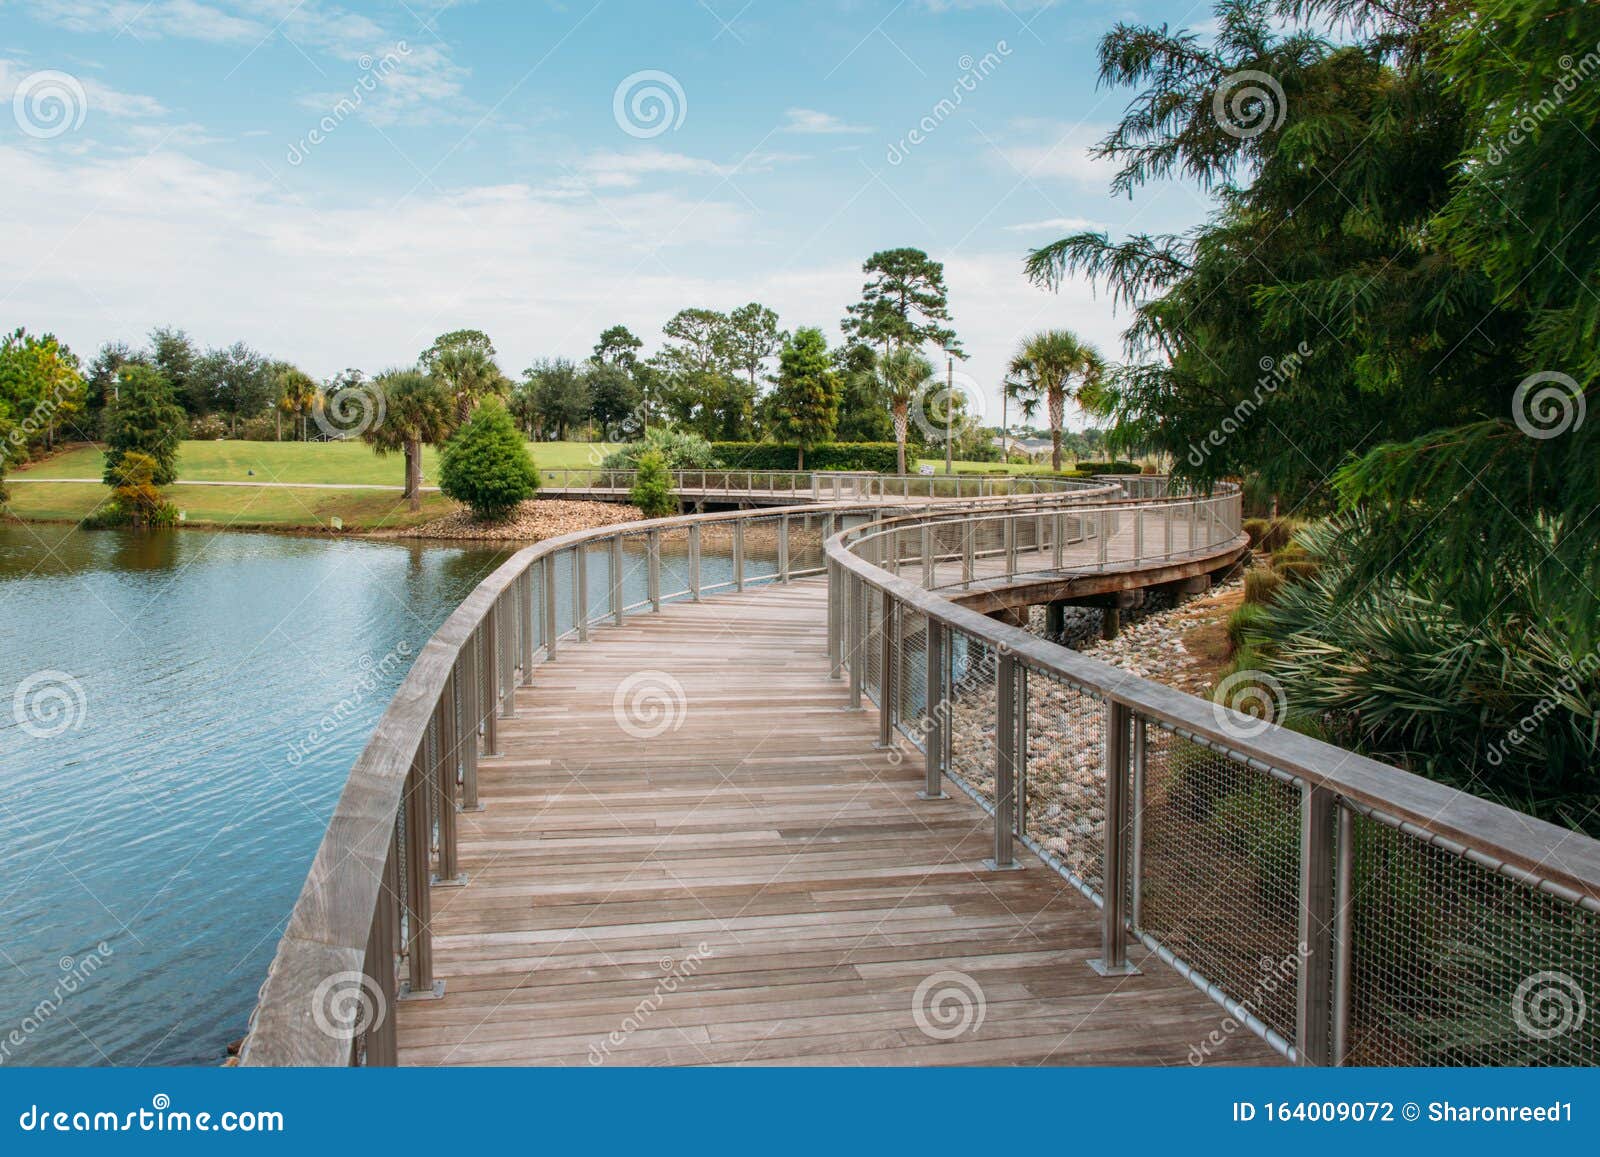 center lake park is a public park with a boardwalk  in the city of oviedo, florida